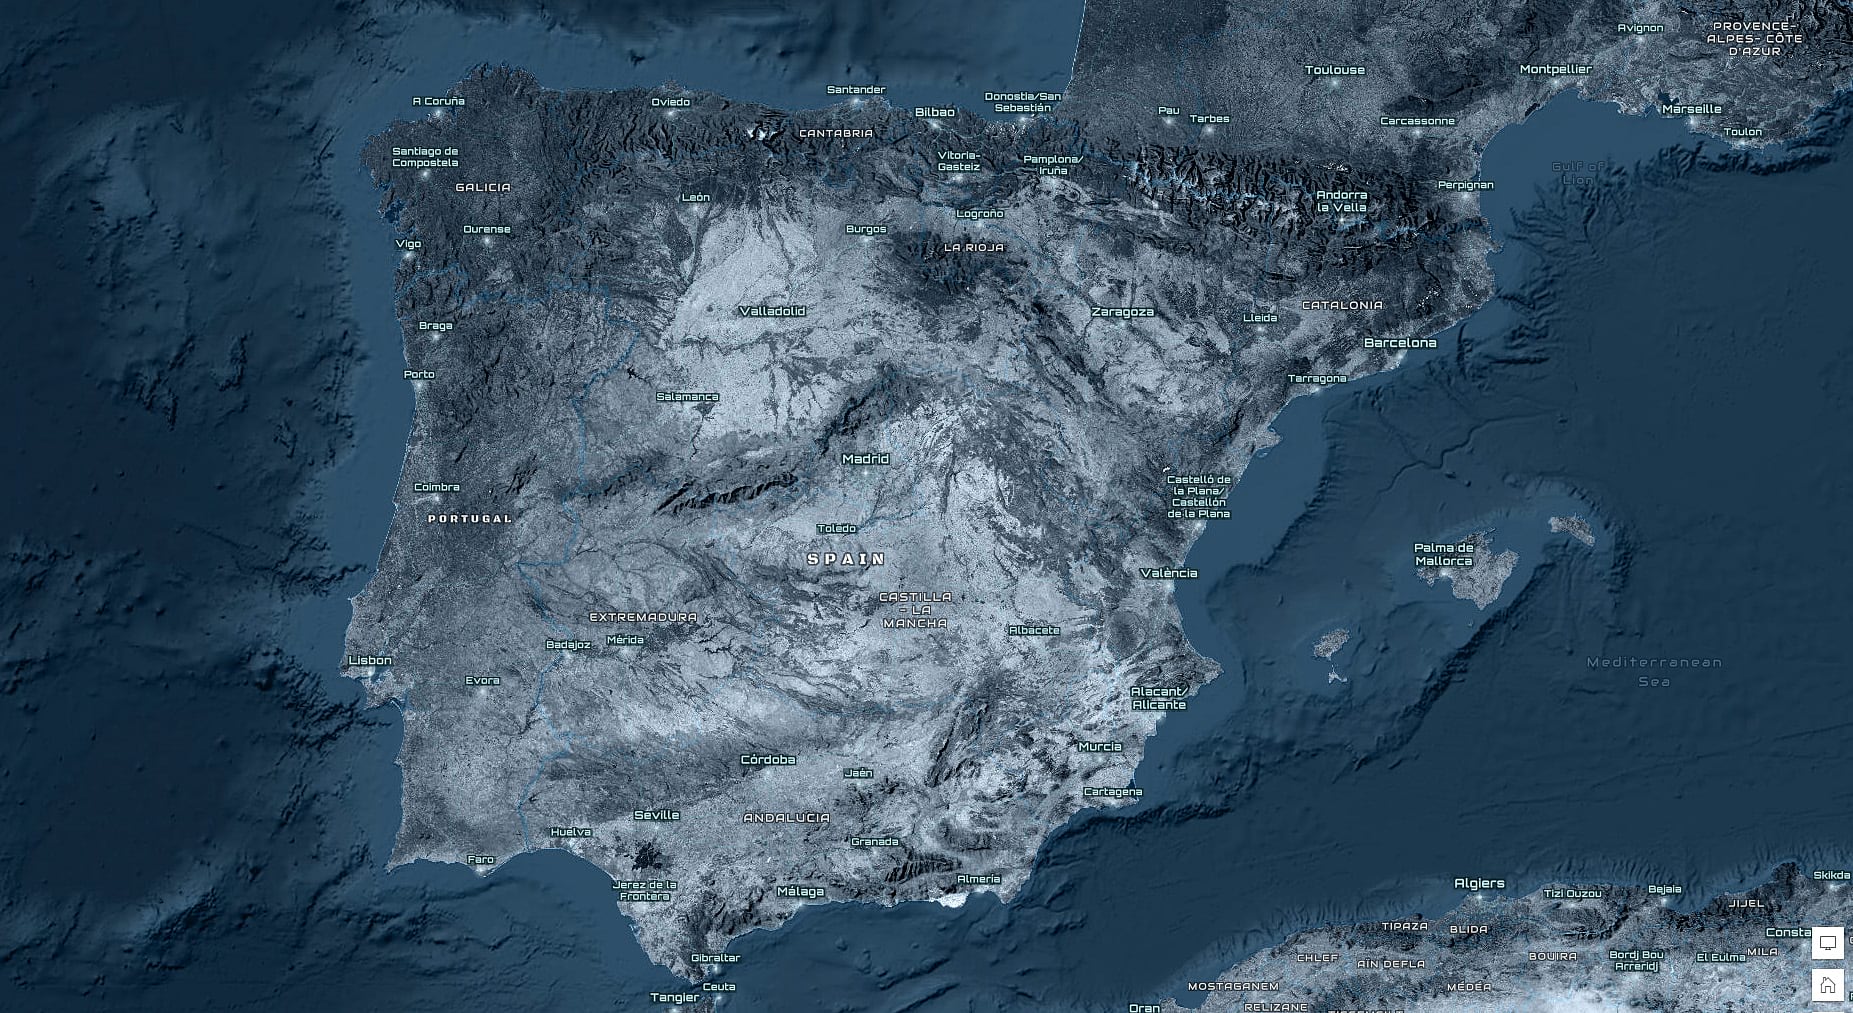 Spain, using theNova basemap combined with Firefly imagery